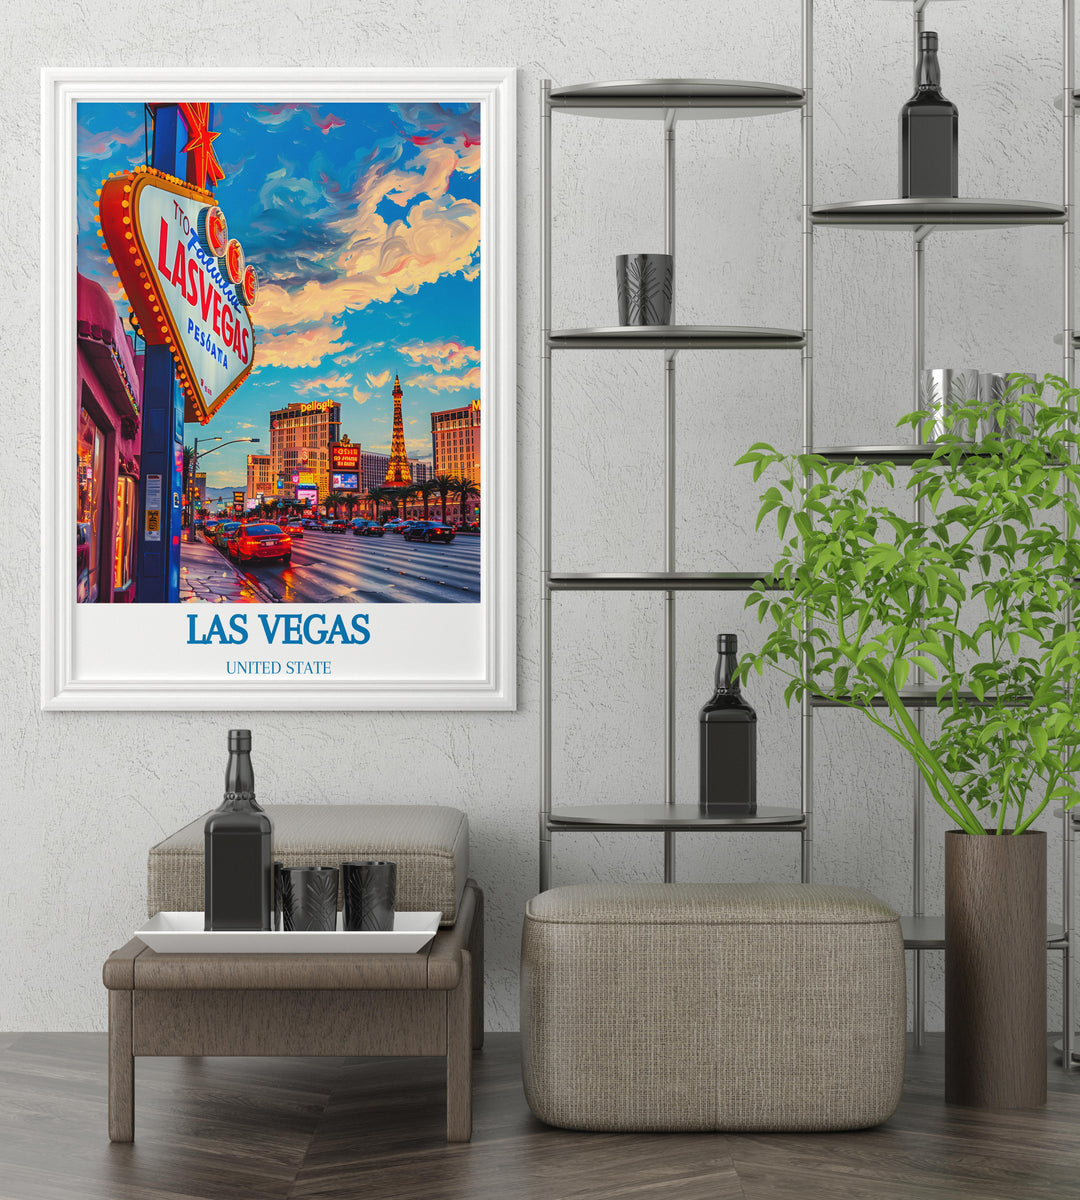 Artwork capturing the bustling atmosphere of the Las Vegas Strip during a lively evening, great for urban decor themes.